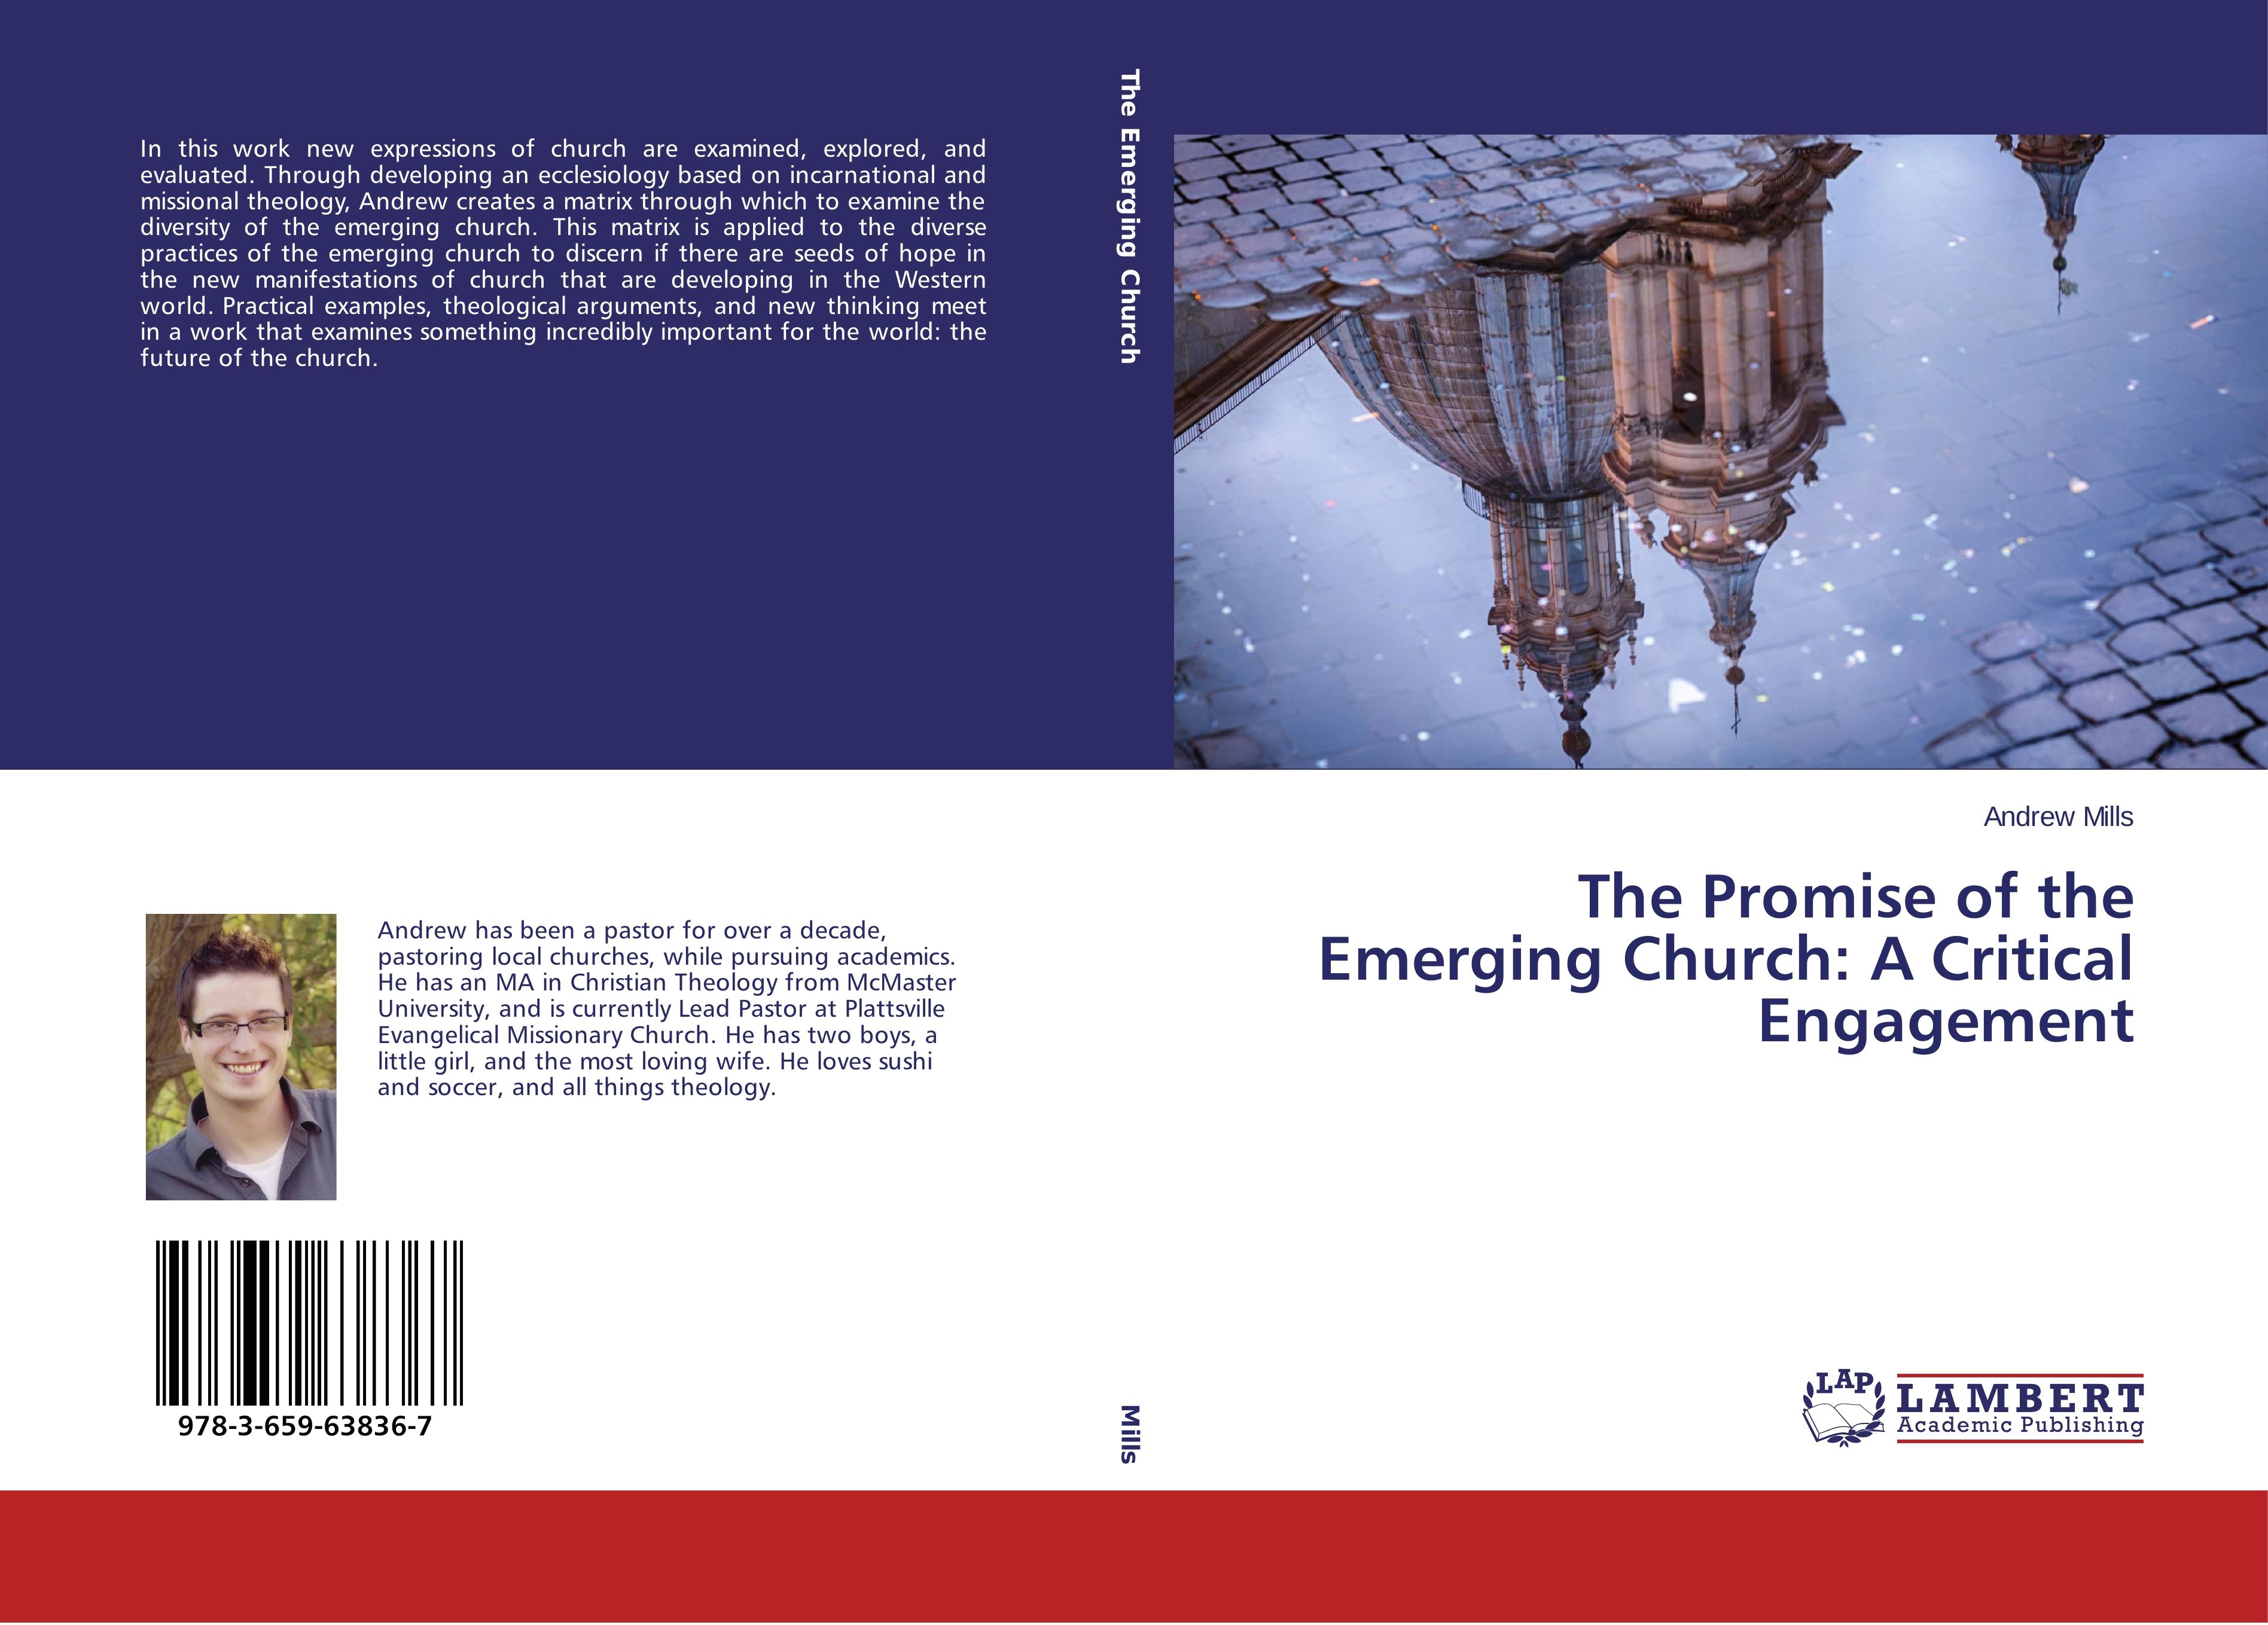 The Promise of the Emerging Church: A Critical Engagement - Andrew Mills